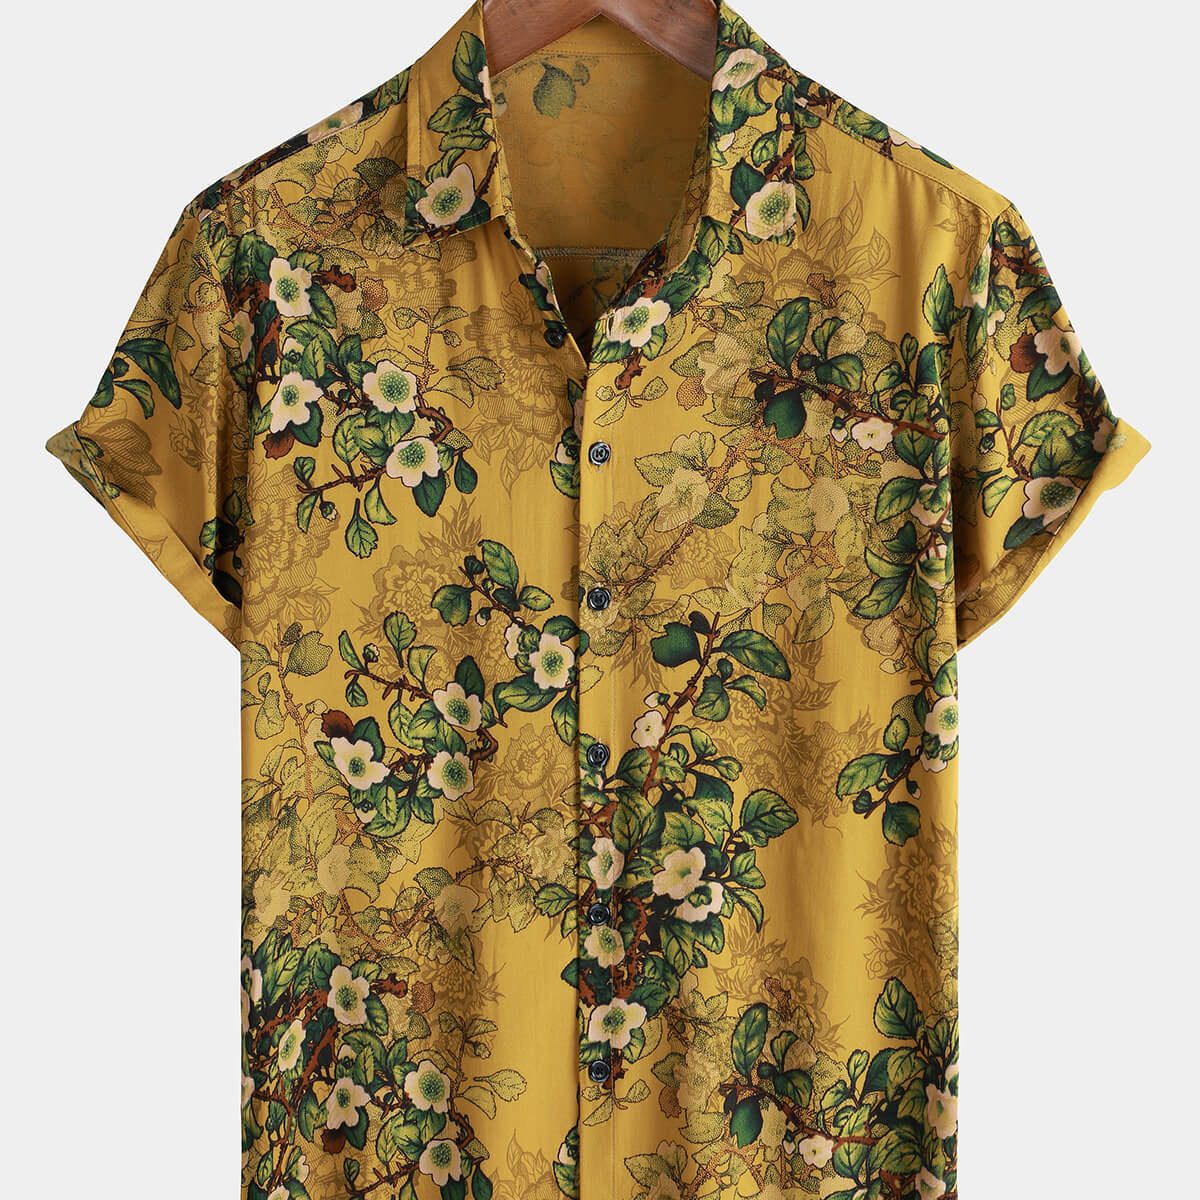 Men's Vintage Holiday Casual Rayon Soft Floral Short Sleeve Button Up Shirt